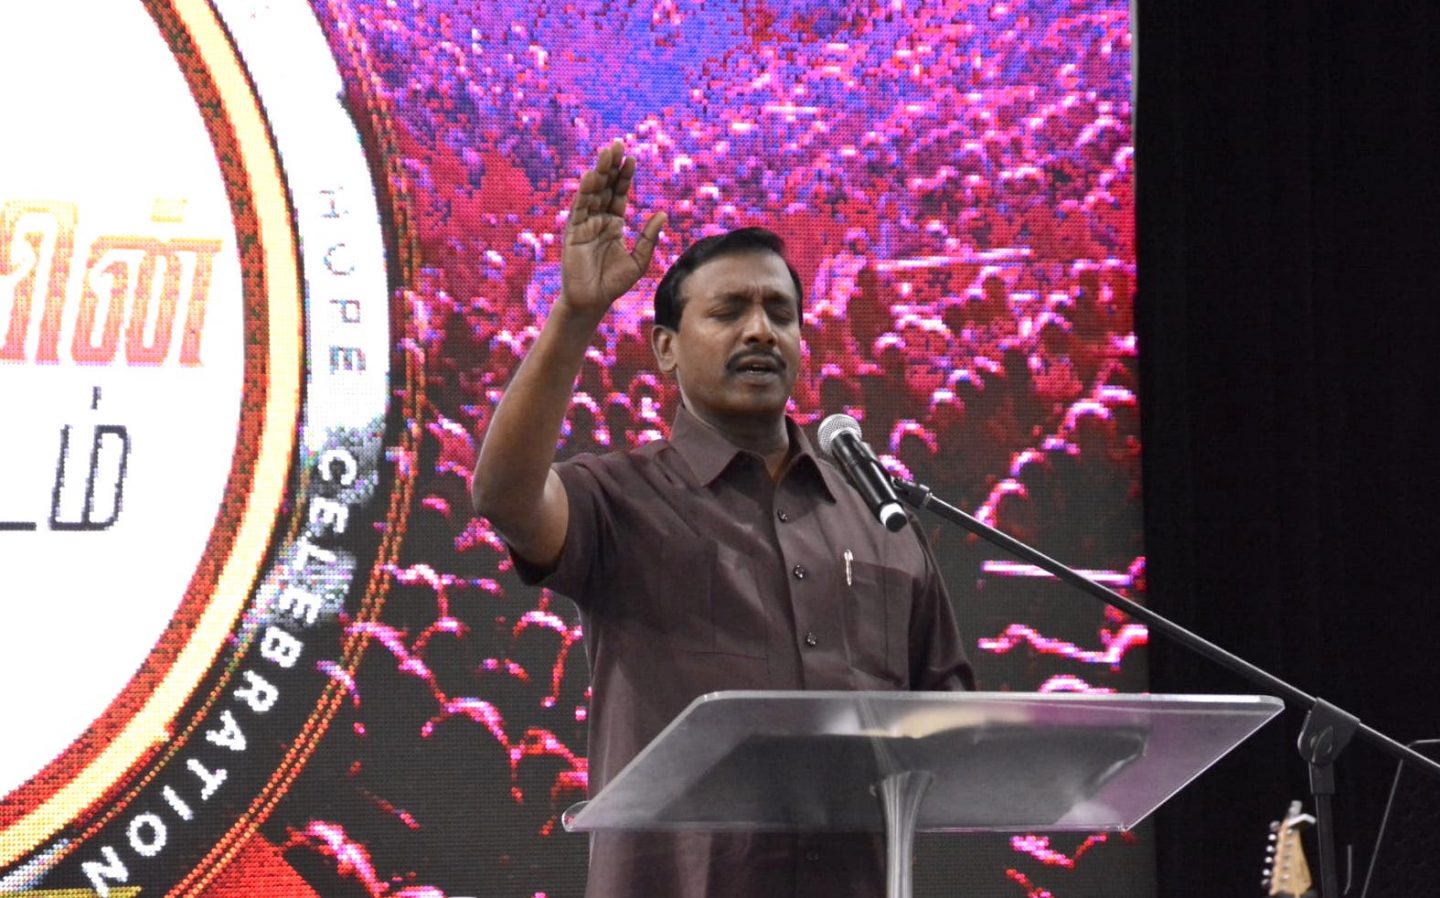 Brother Mohan C. Lazarus was the evangelist at the Tamil rally. Photo by Calvin Mak.